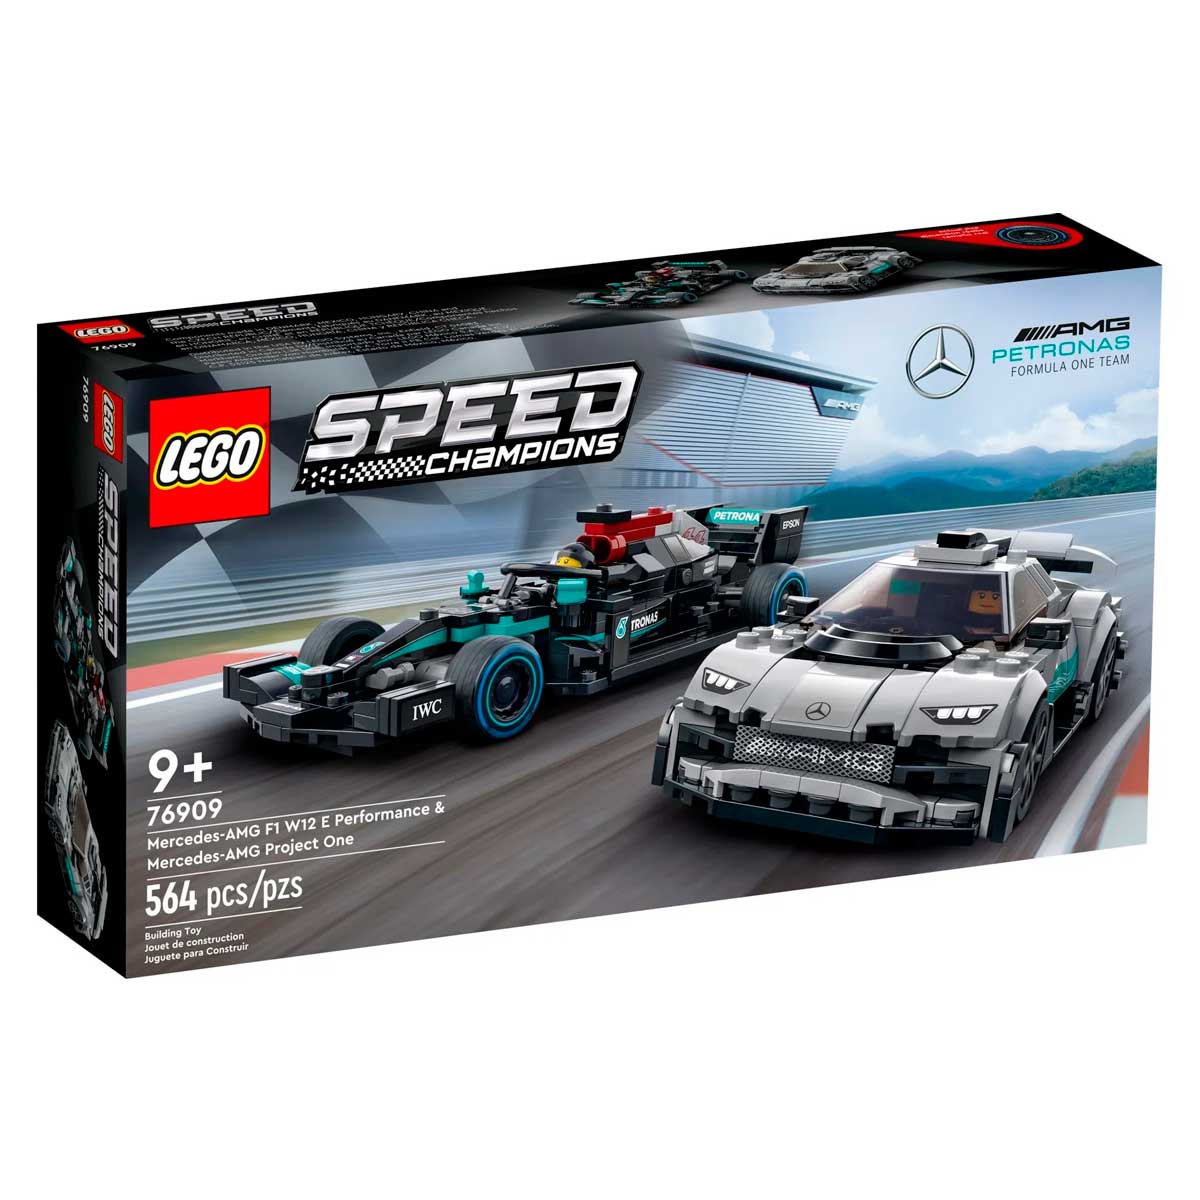 LEGO Speed Champions - Mercedes-AMG F1 W12 E Performance e Mercedes-AMG Project One - 76909